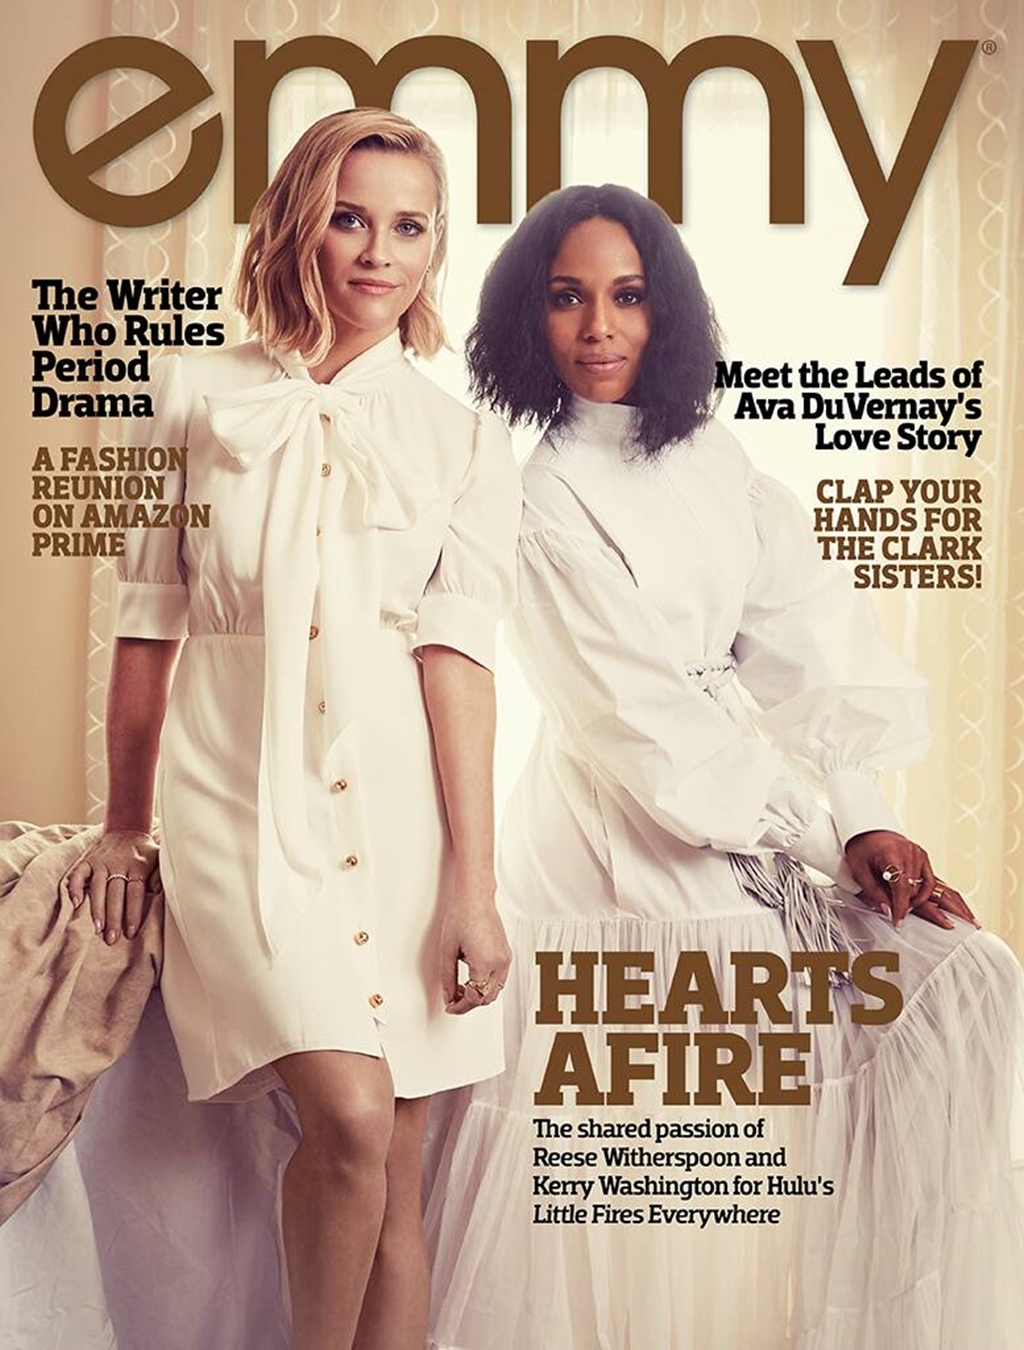 Photos n°1 : Reese Witherspoon and Kerry Washington Not Social Distancing!